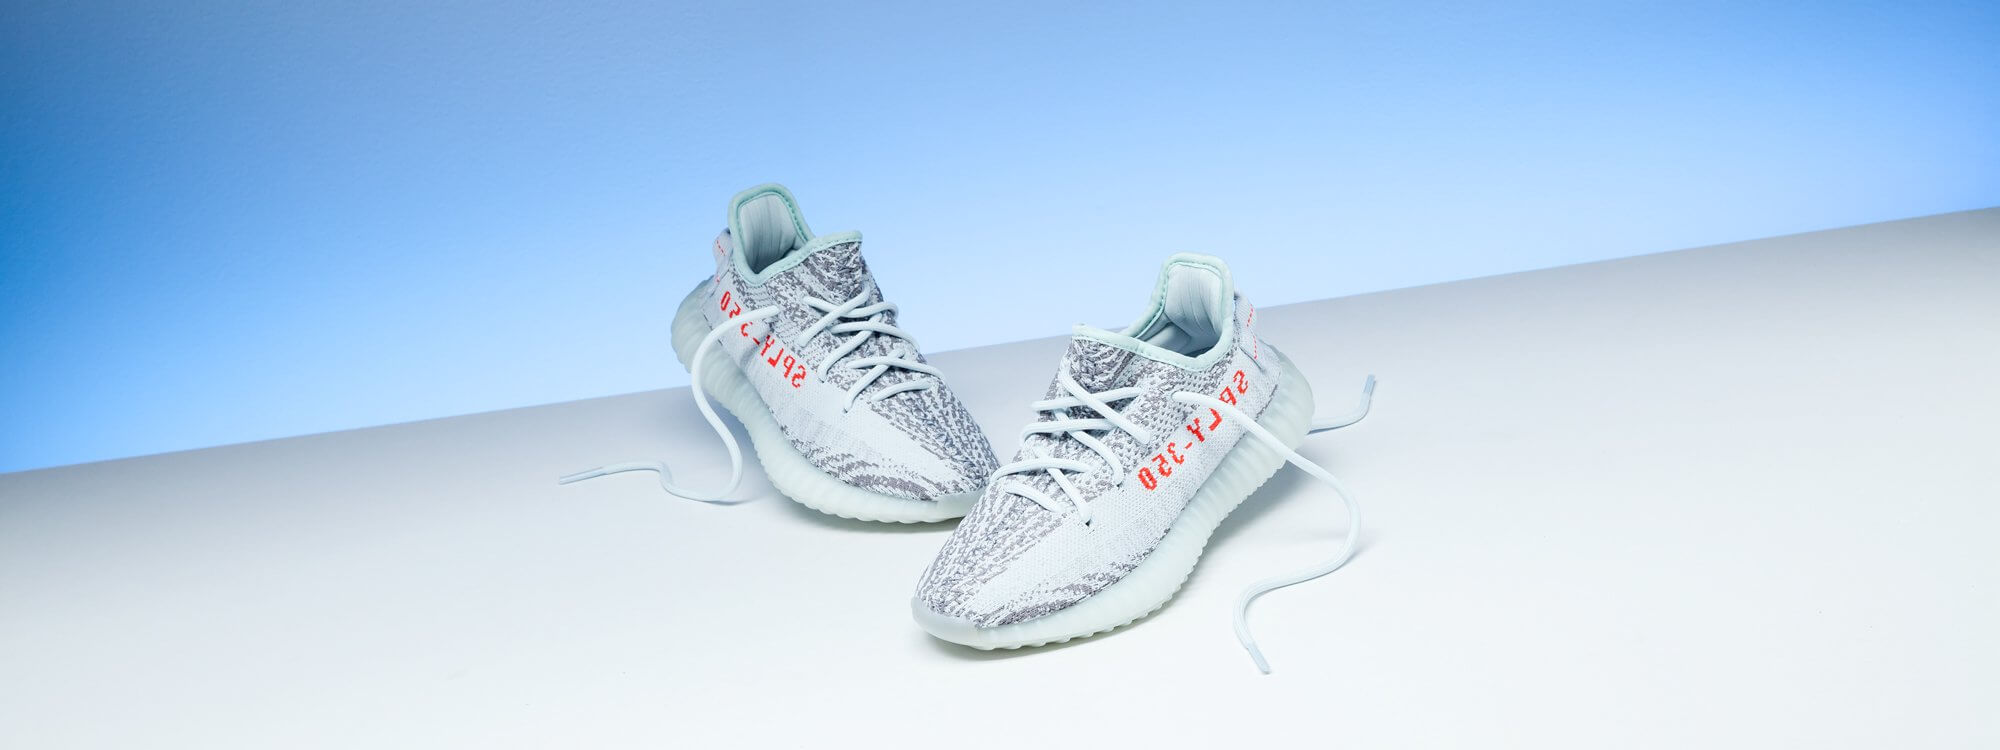  Yeezy Boost 350 V2 Blue Tint for sale